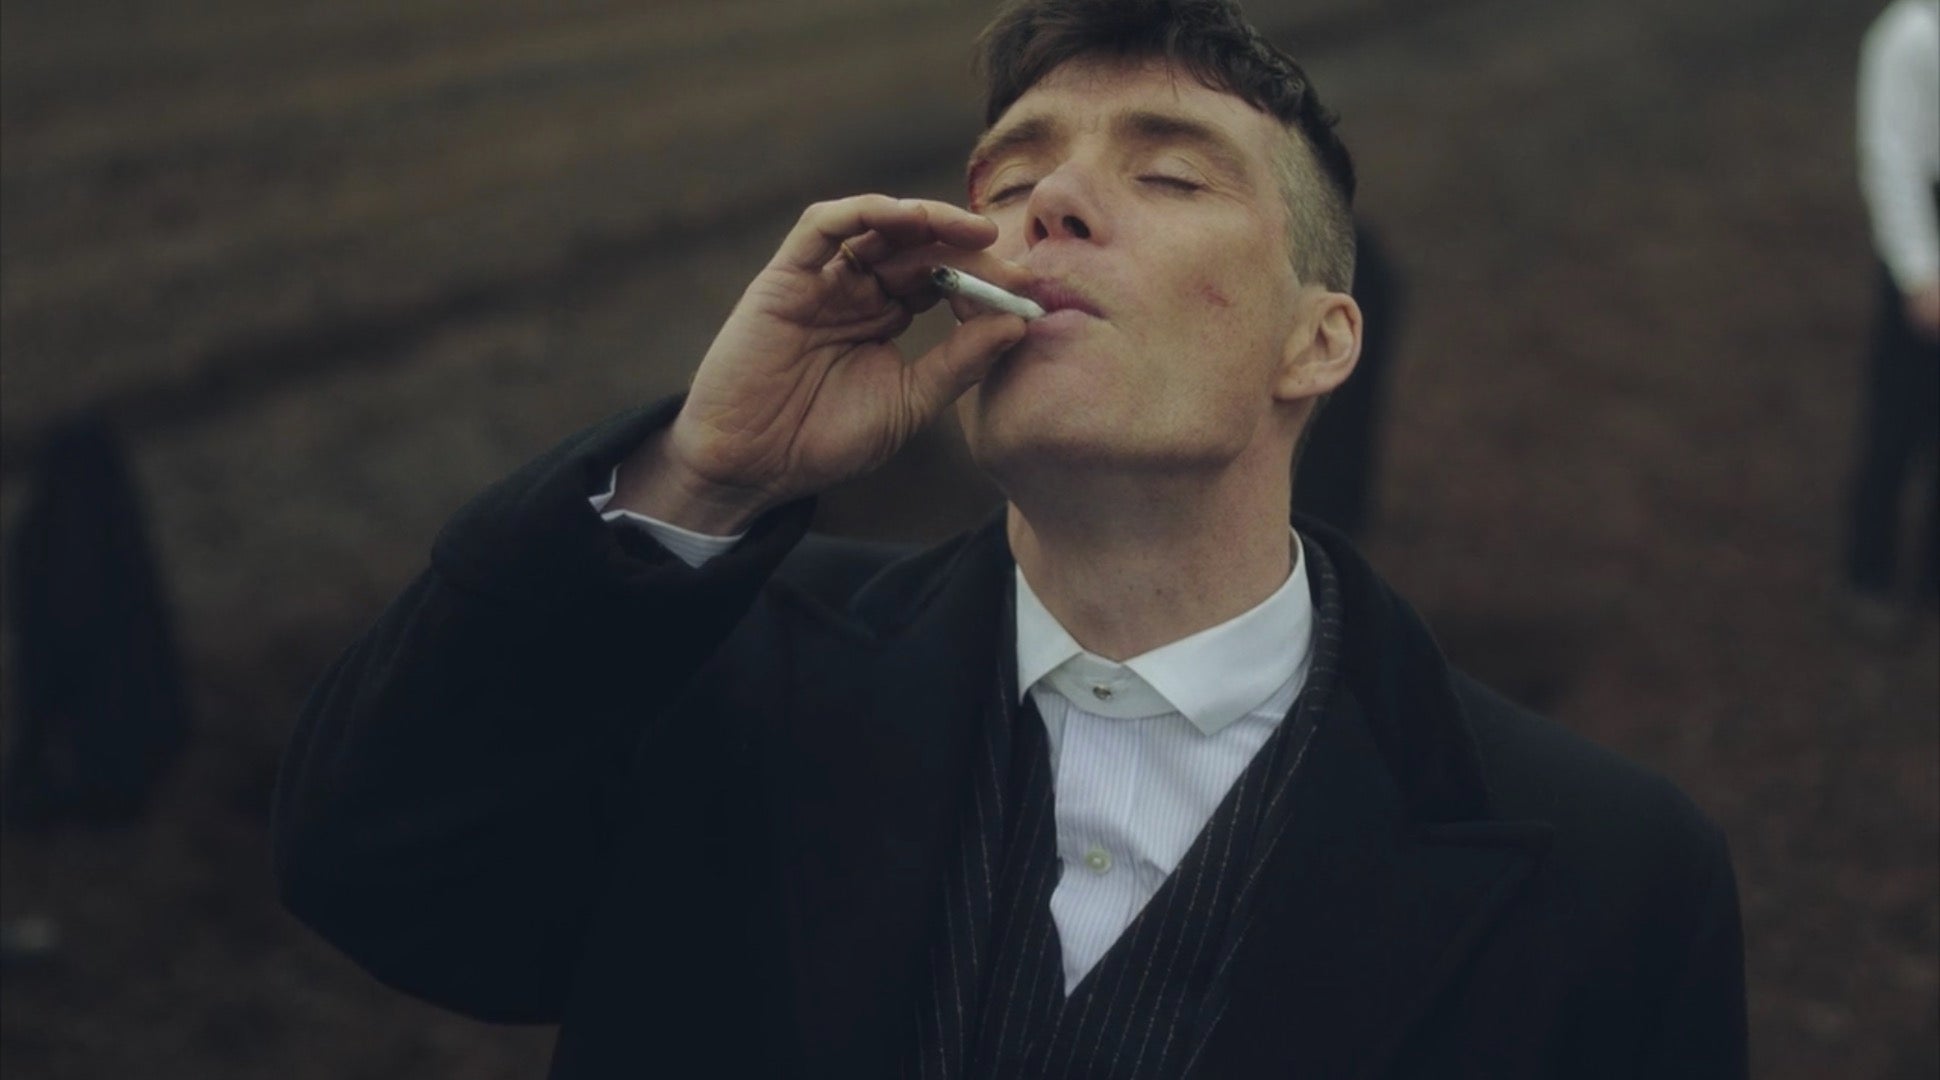 Peaky blinders cillian murphy has smoked over herbal cigarettes playing tommy shelby the the